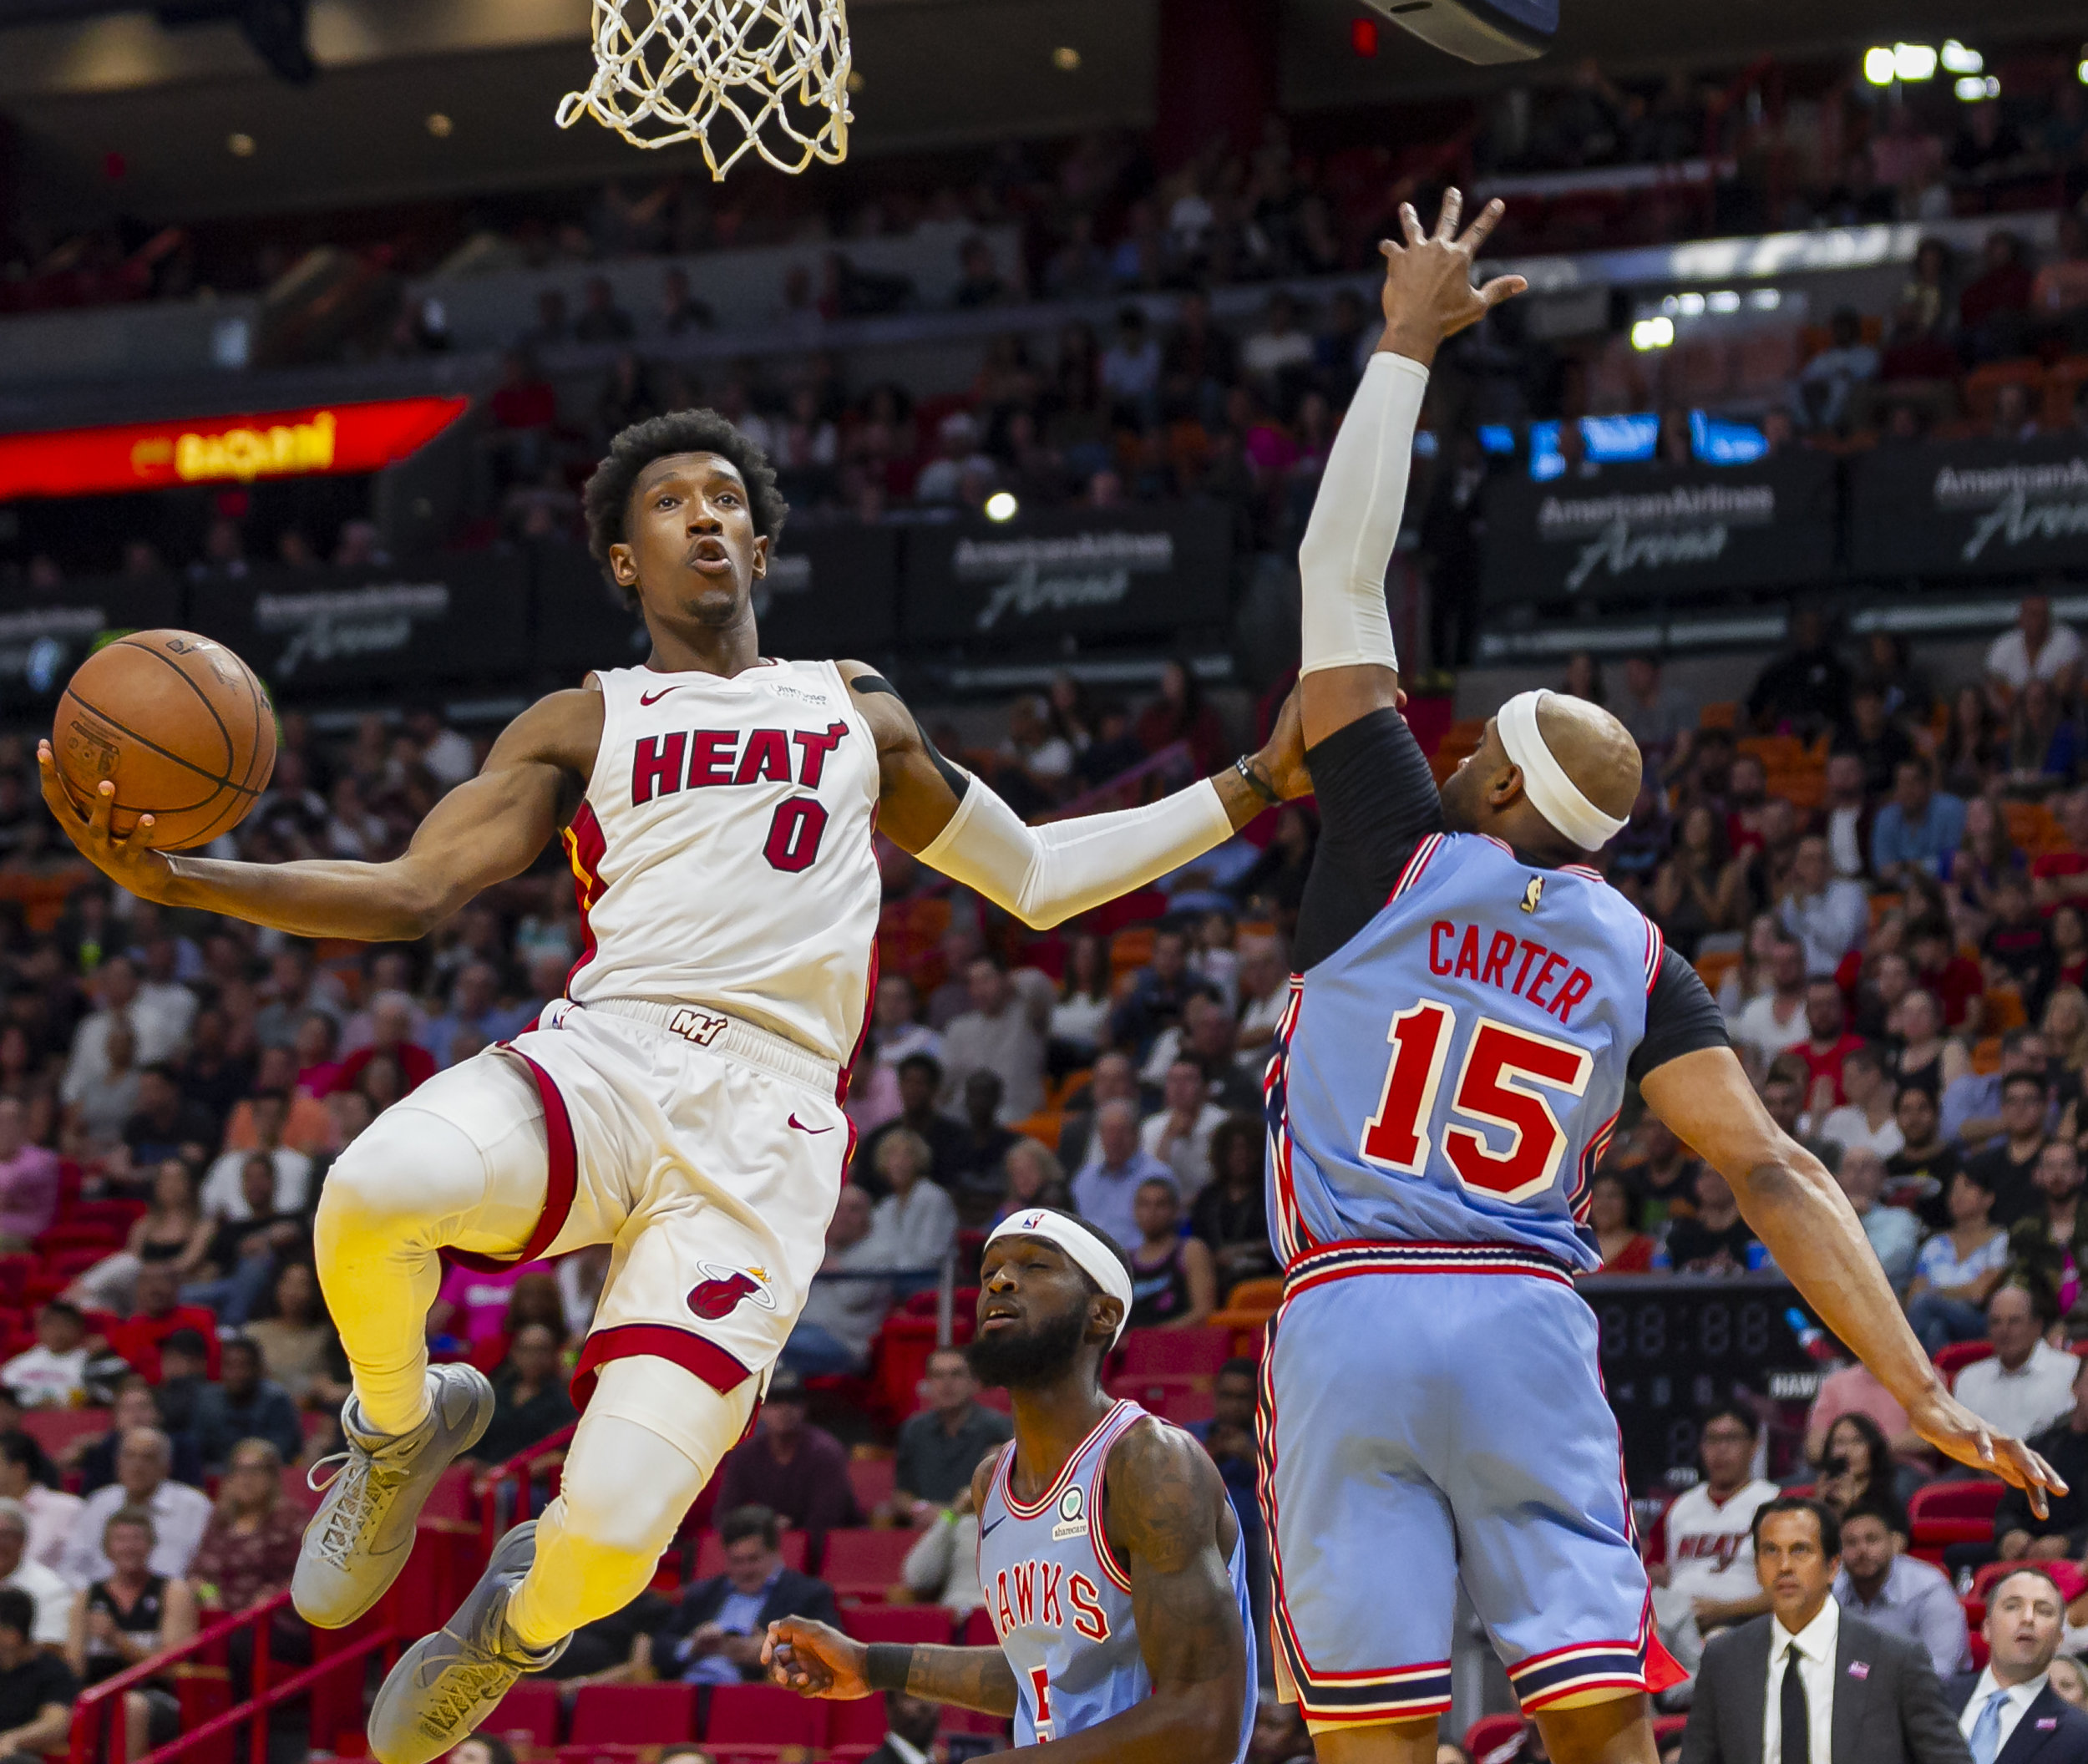  Miami Heat guard Josh Richardson (0) goes for an assist while Atlanta Hawks guard Vince Carter (15) tries to defend during the first quarter as the Miami Heat host the Atlanta Hawks at the AmericanAirlines Arena in downtown Miami on Monday, March 4,